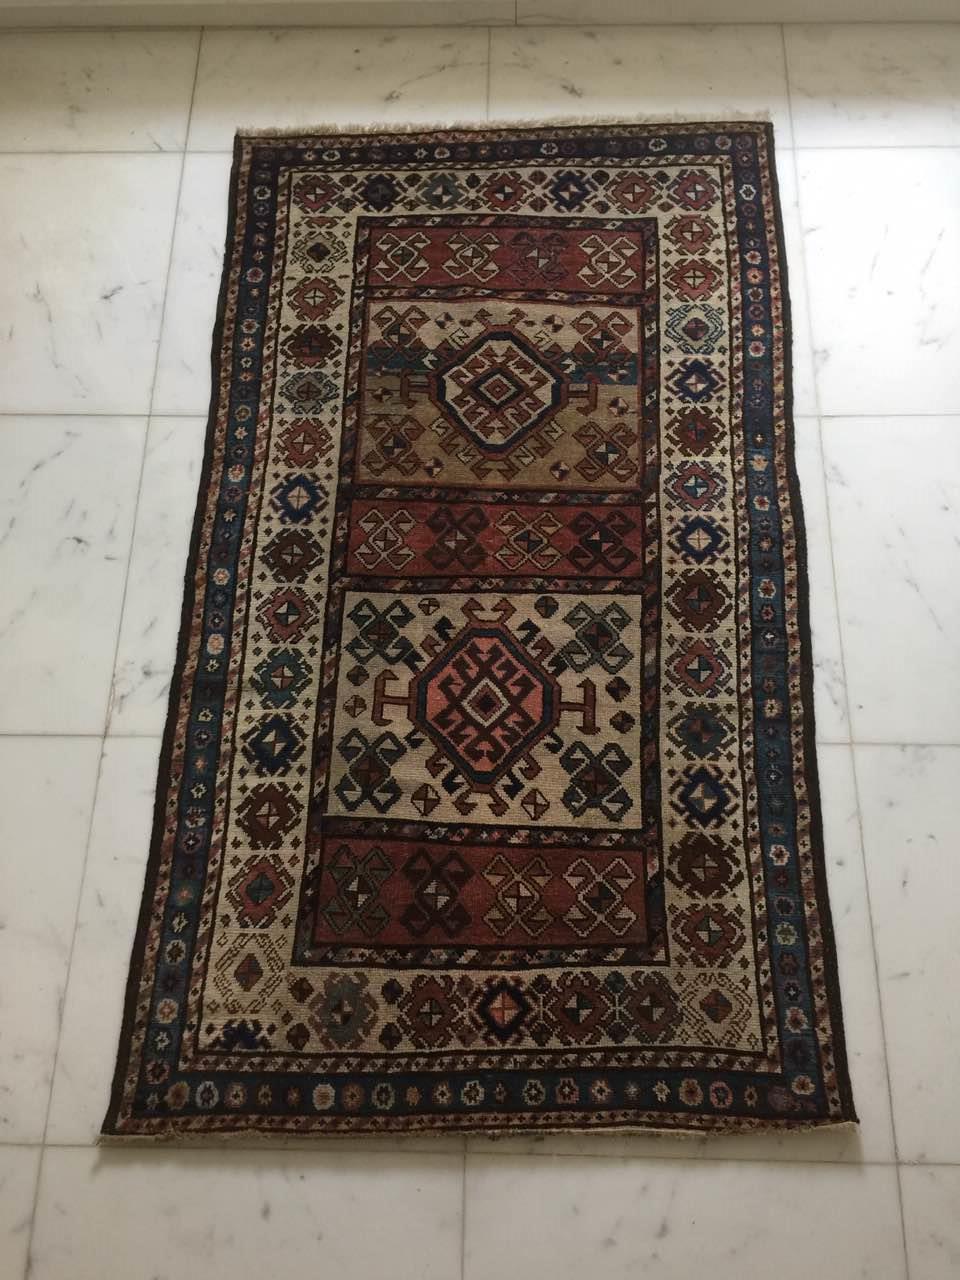 Tapis laine Nord ouest Iran 184 x 107 cm